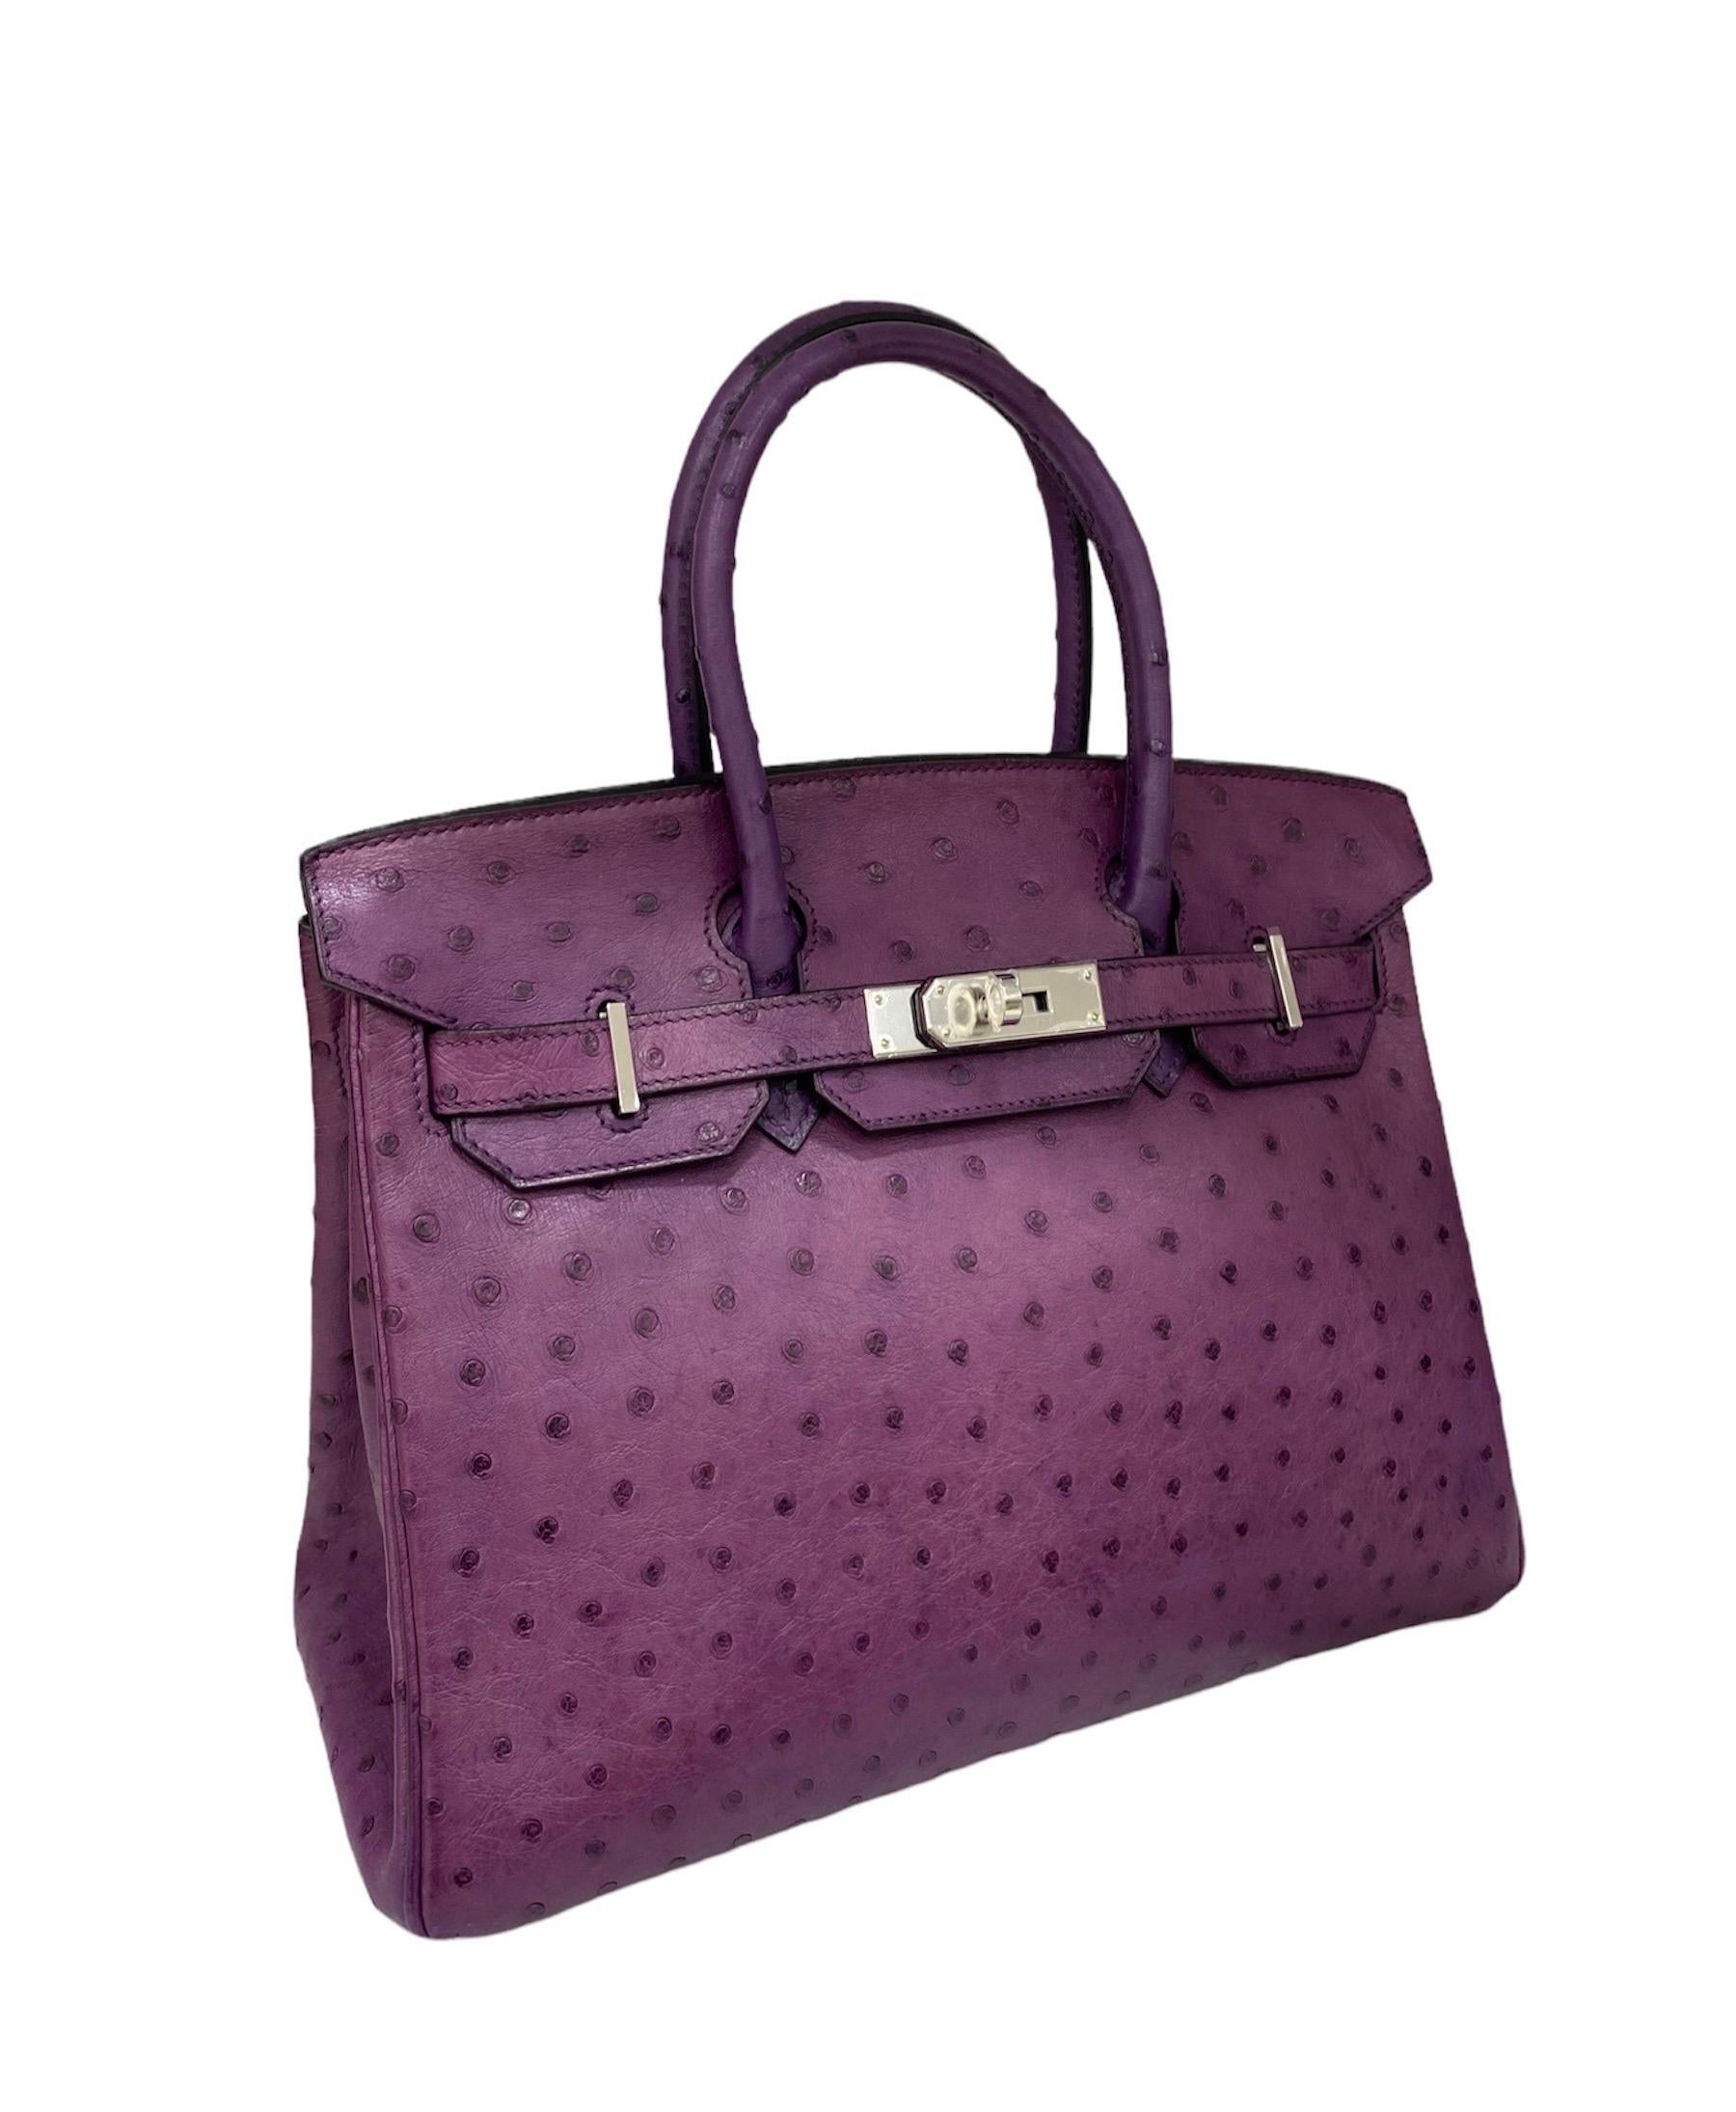 Hermes handbag, Birkin model, size 30, made of purple ostrich leather with silver hardware.

Equipped with double leather handle and the classic flap closure with interlocking.

Internally lined in smooth purple leather, very roomy. Full set,